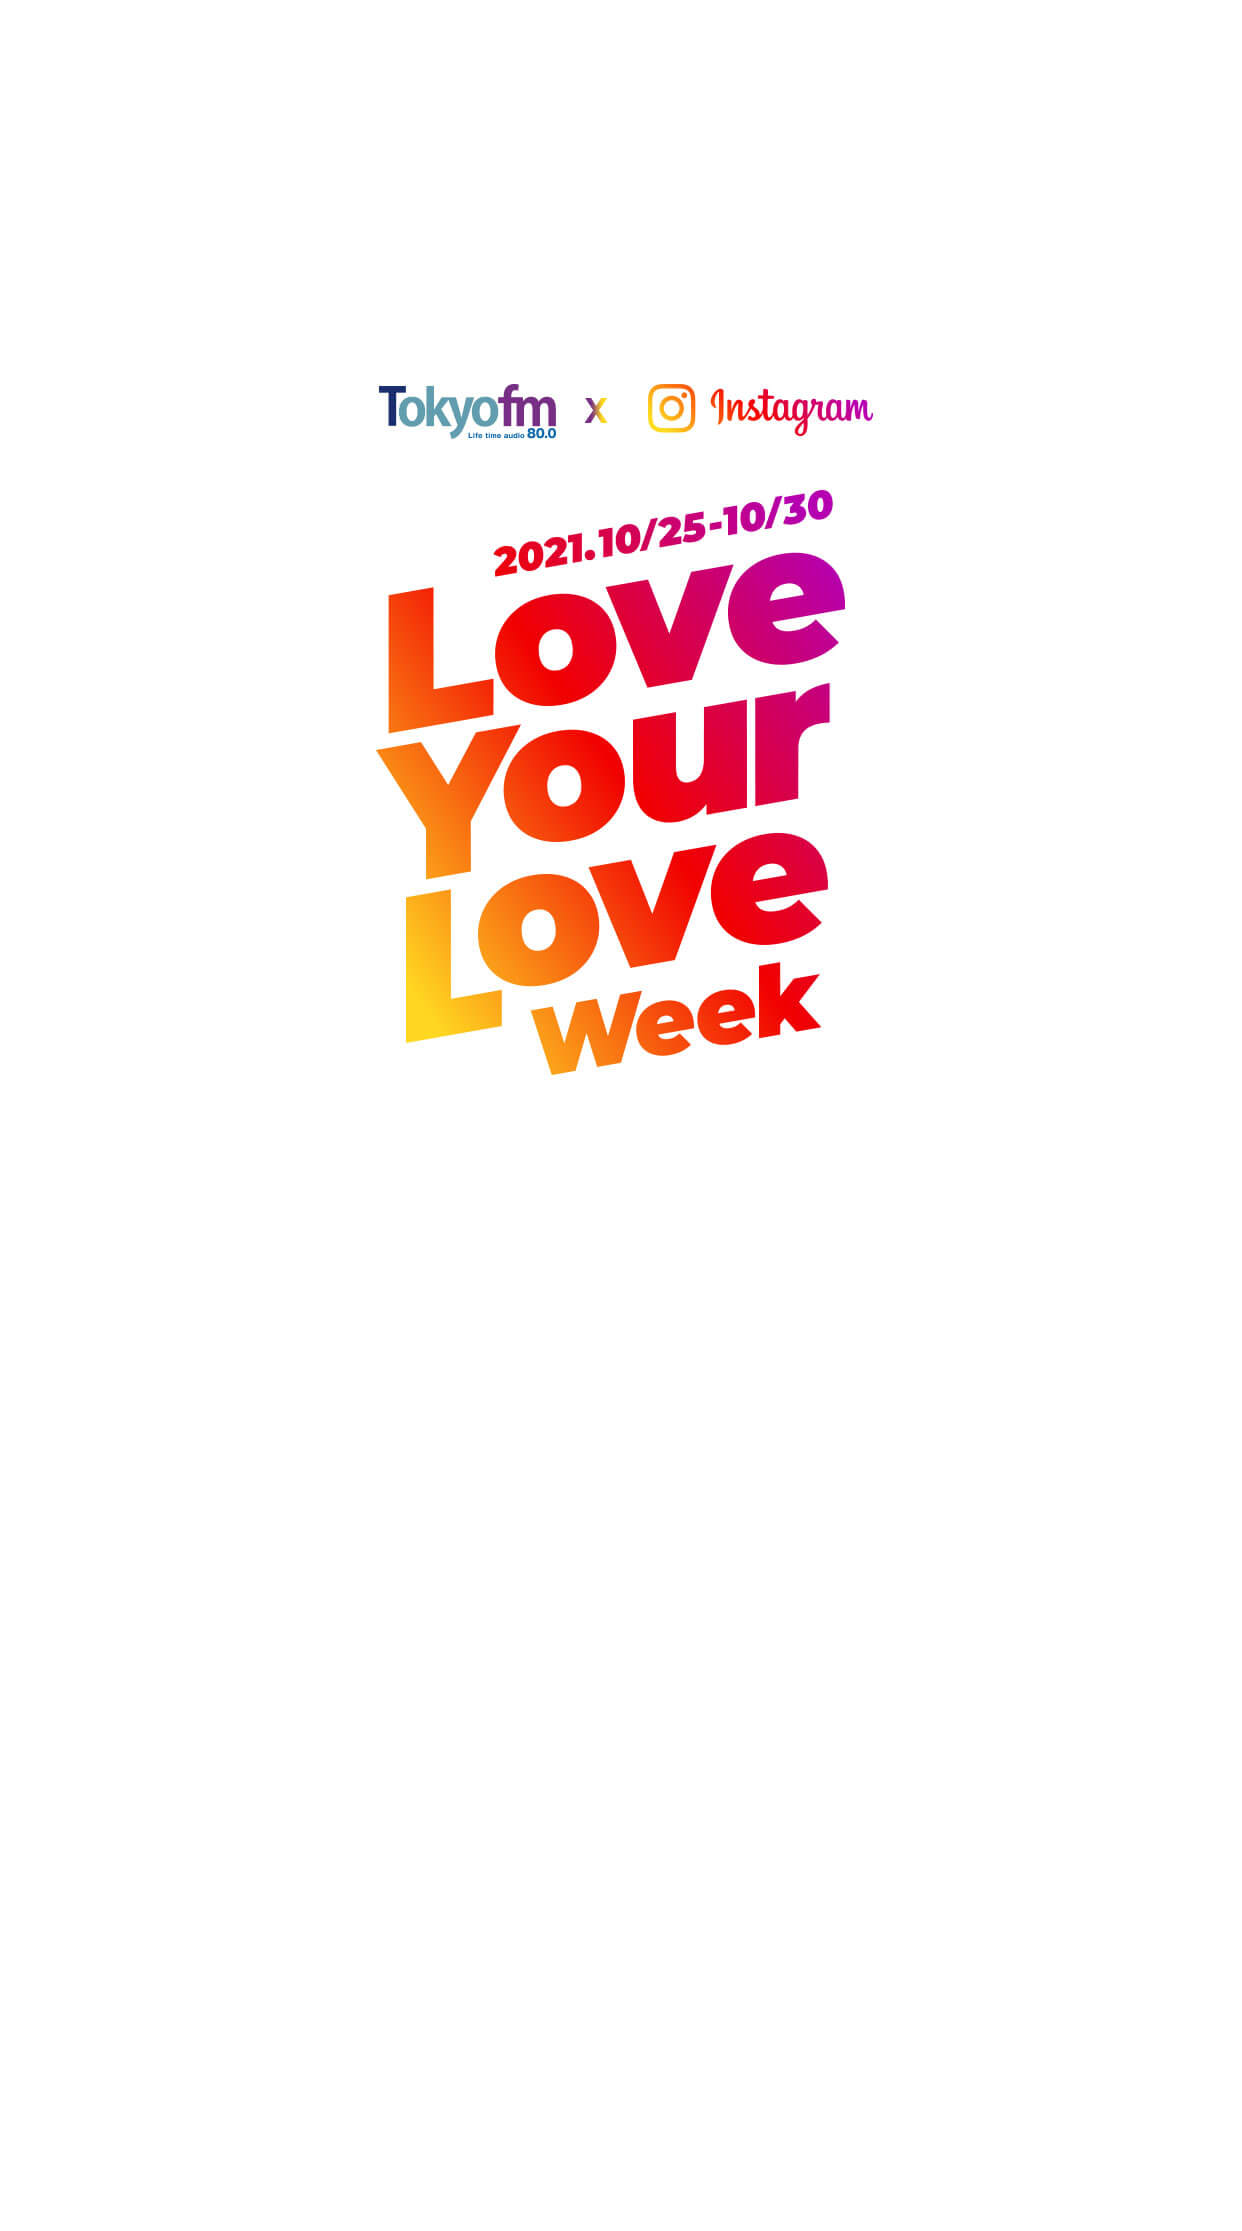 Love Your Love Week supported by Instagram -TOKYO FM 80.0MHz-